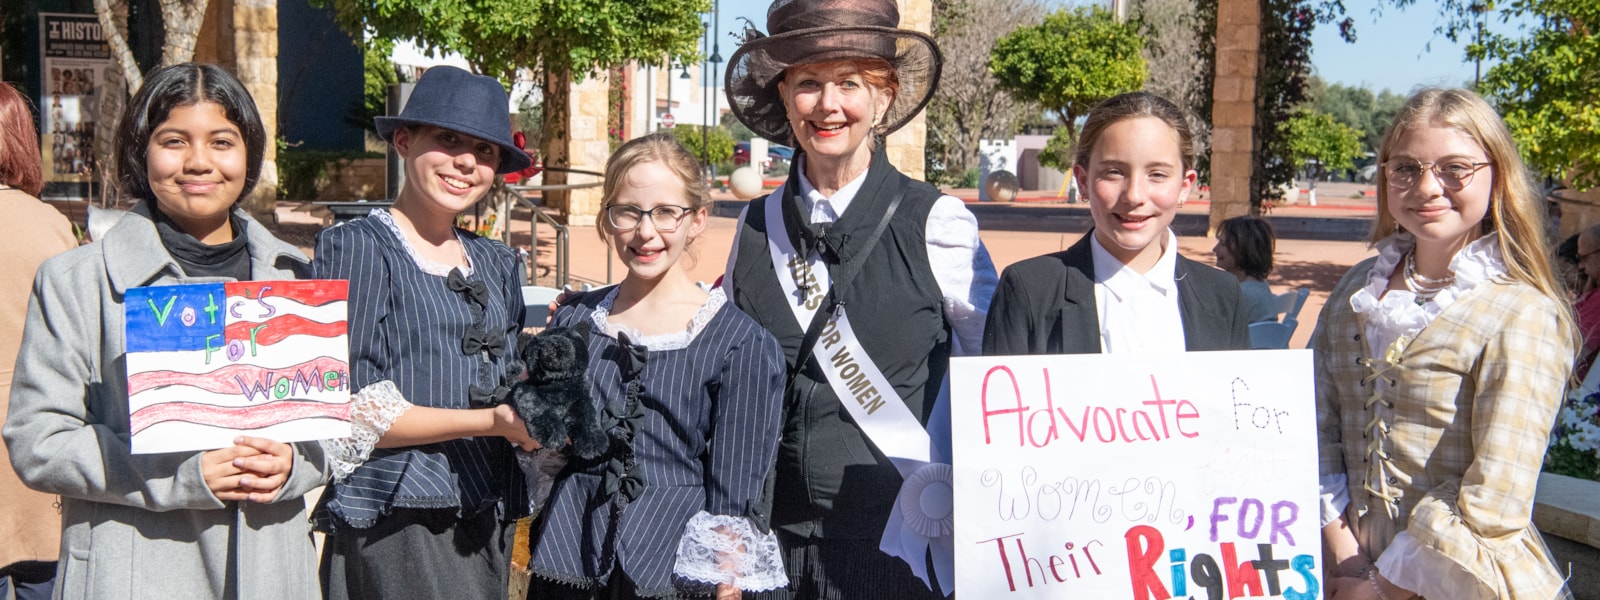 Canyon Ridge students pose at the Women's Suffrage open house at the City of Surprise.